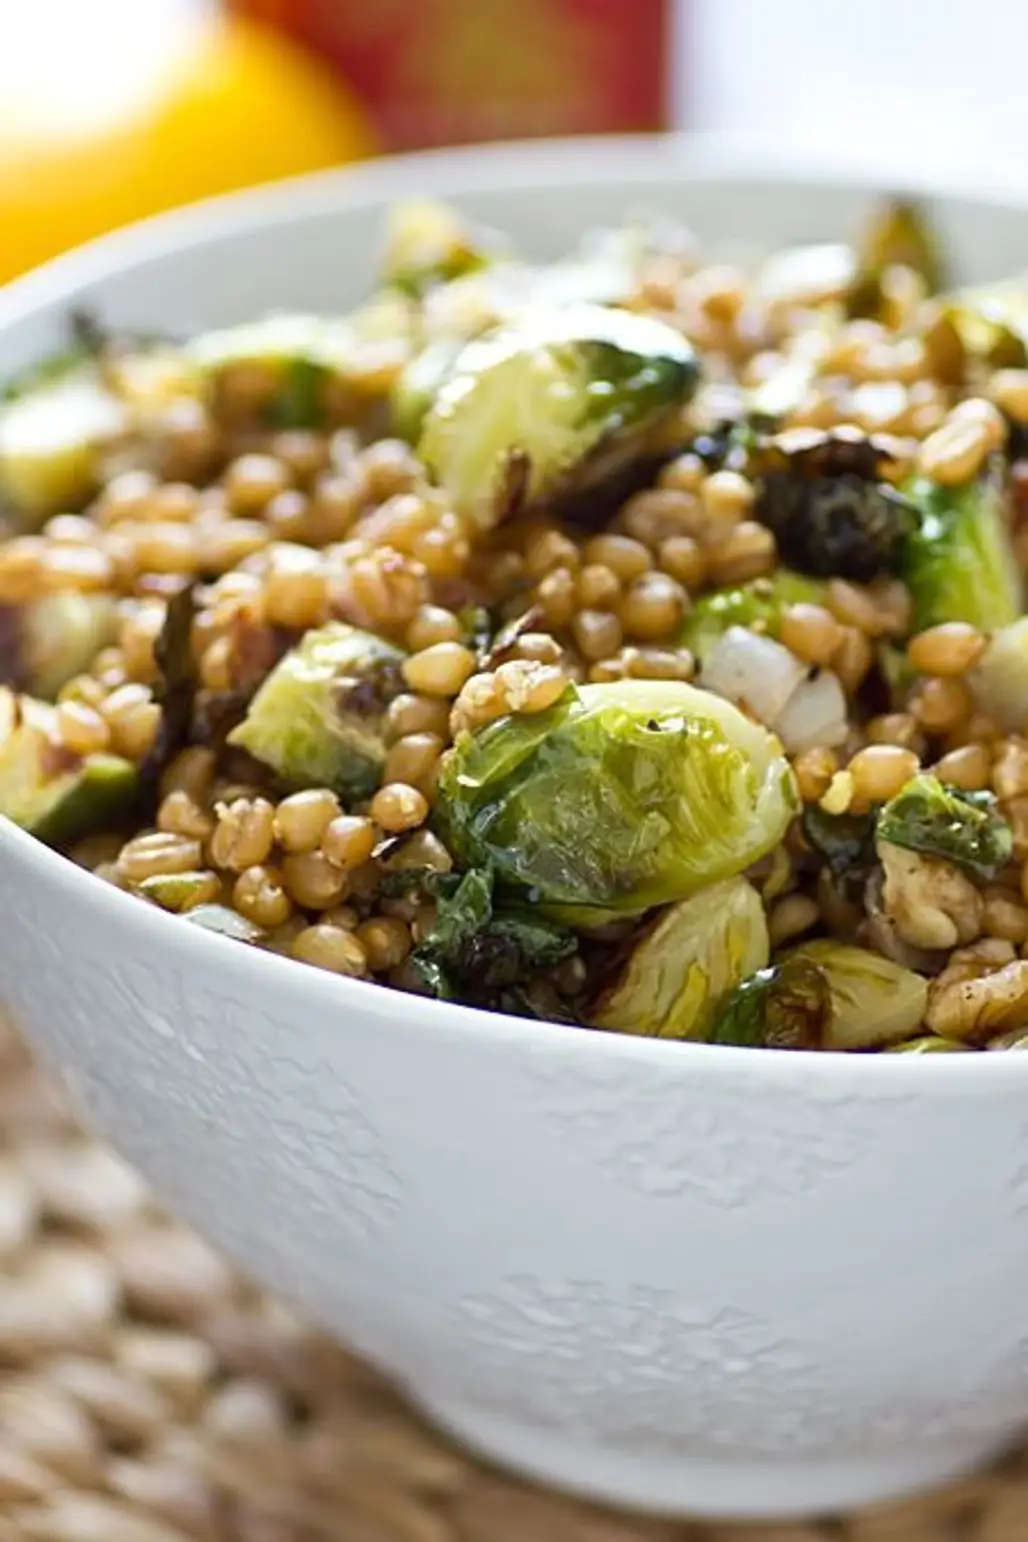 Lemony Wheat Berries with Roasted Brussel Sprouts